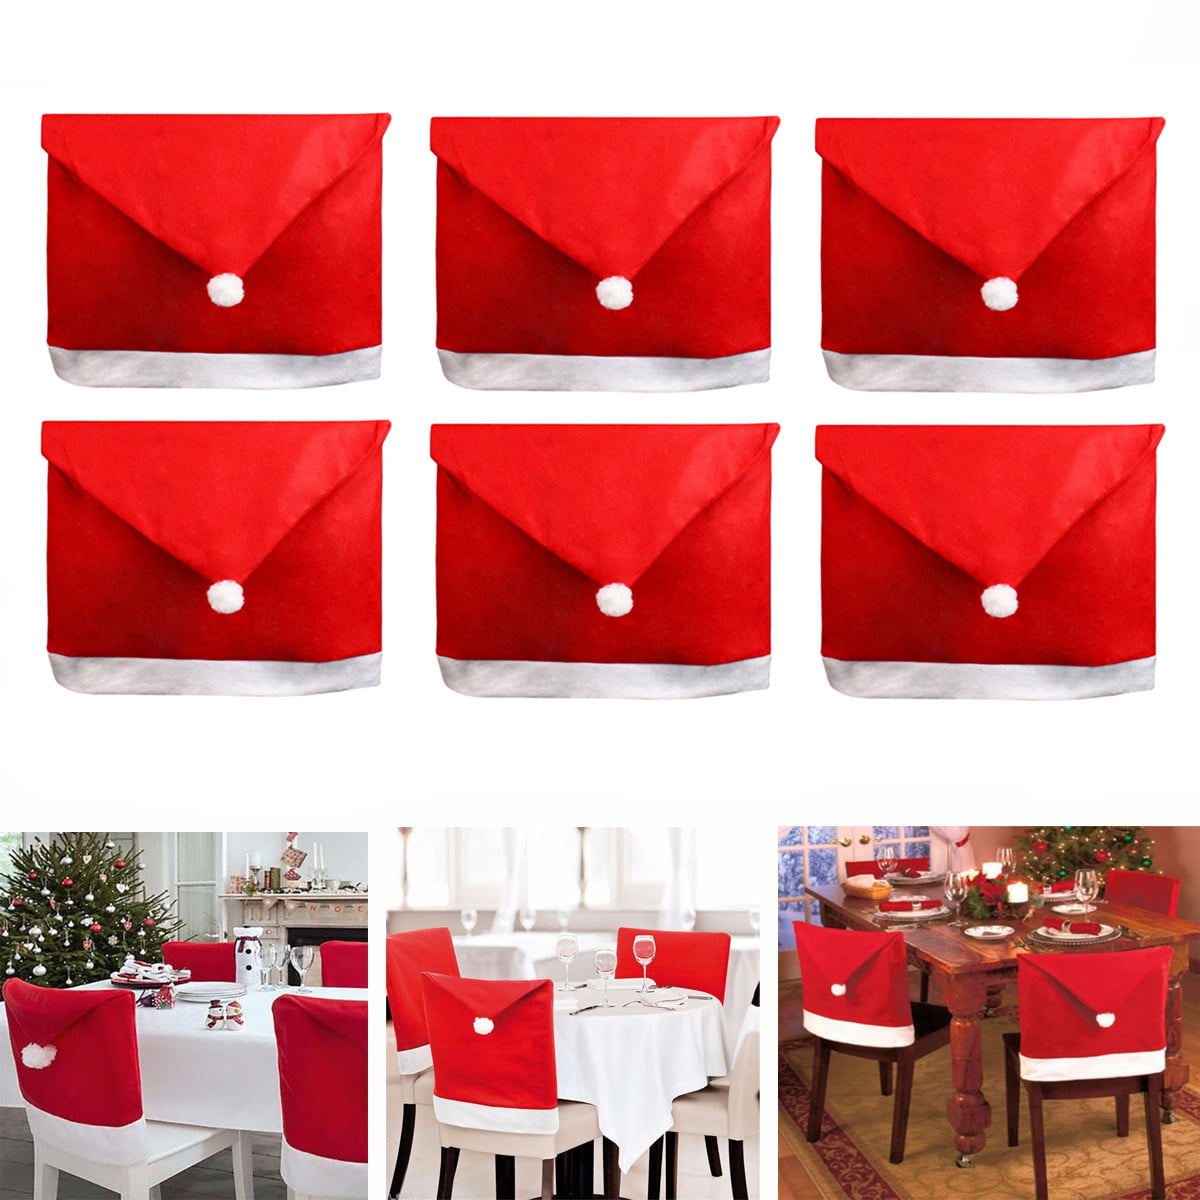 4pcs Santa Red Hat Chair Covers Christmas Decorations Dinner Chair Xmas Cap Sets 